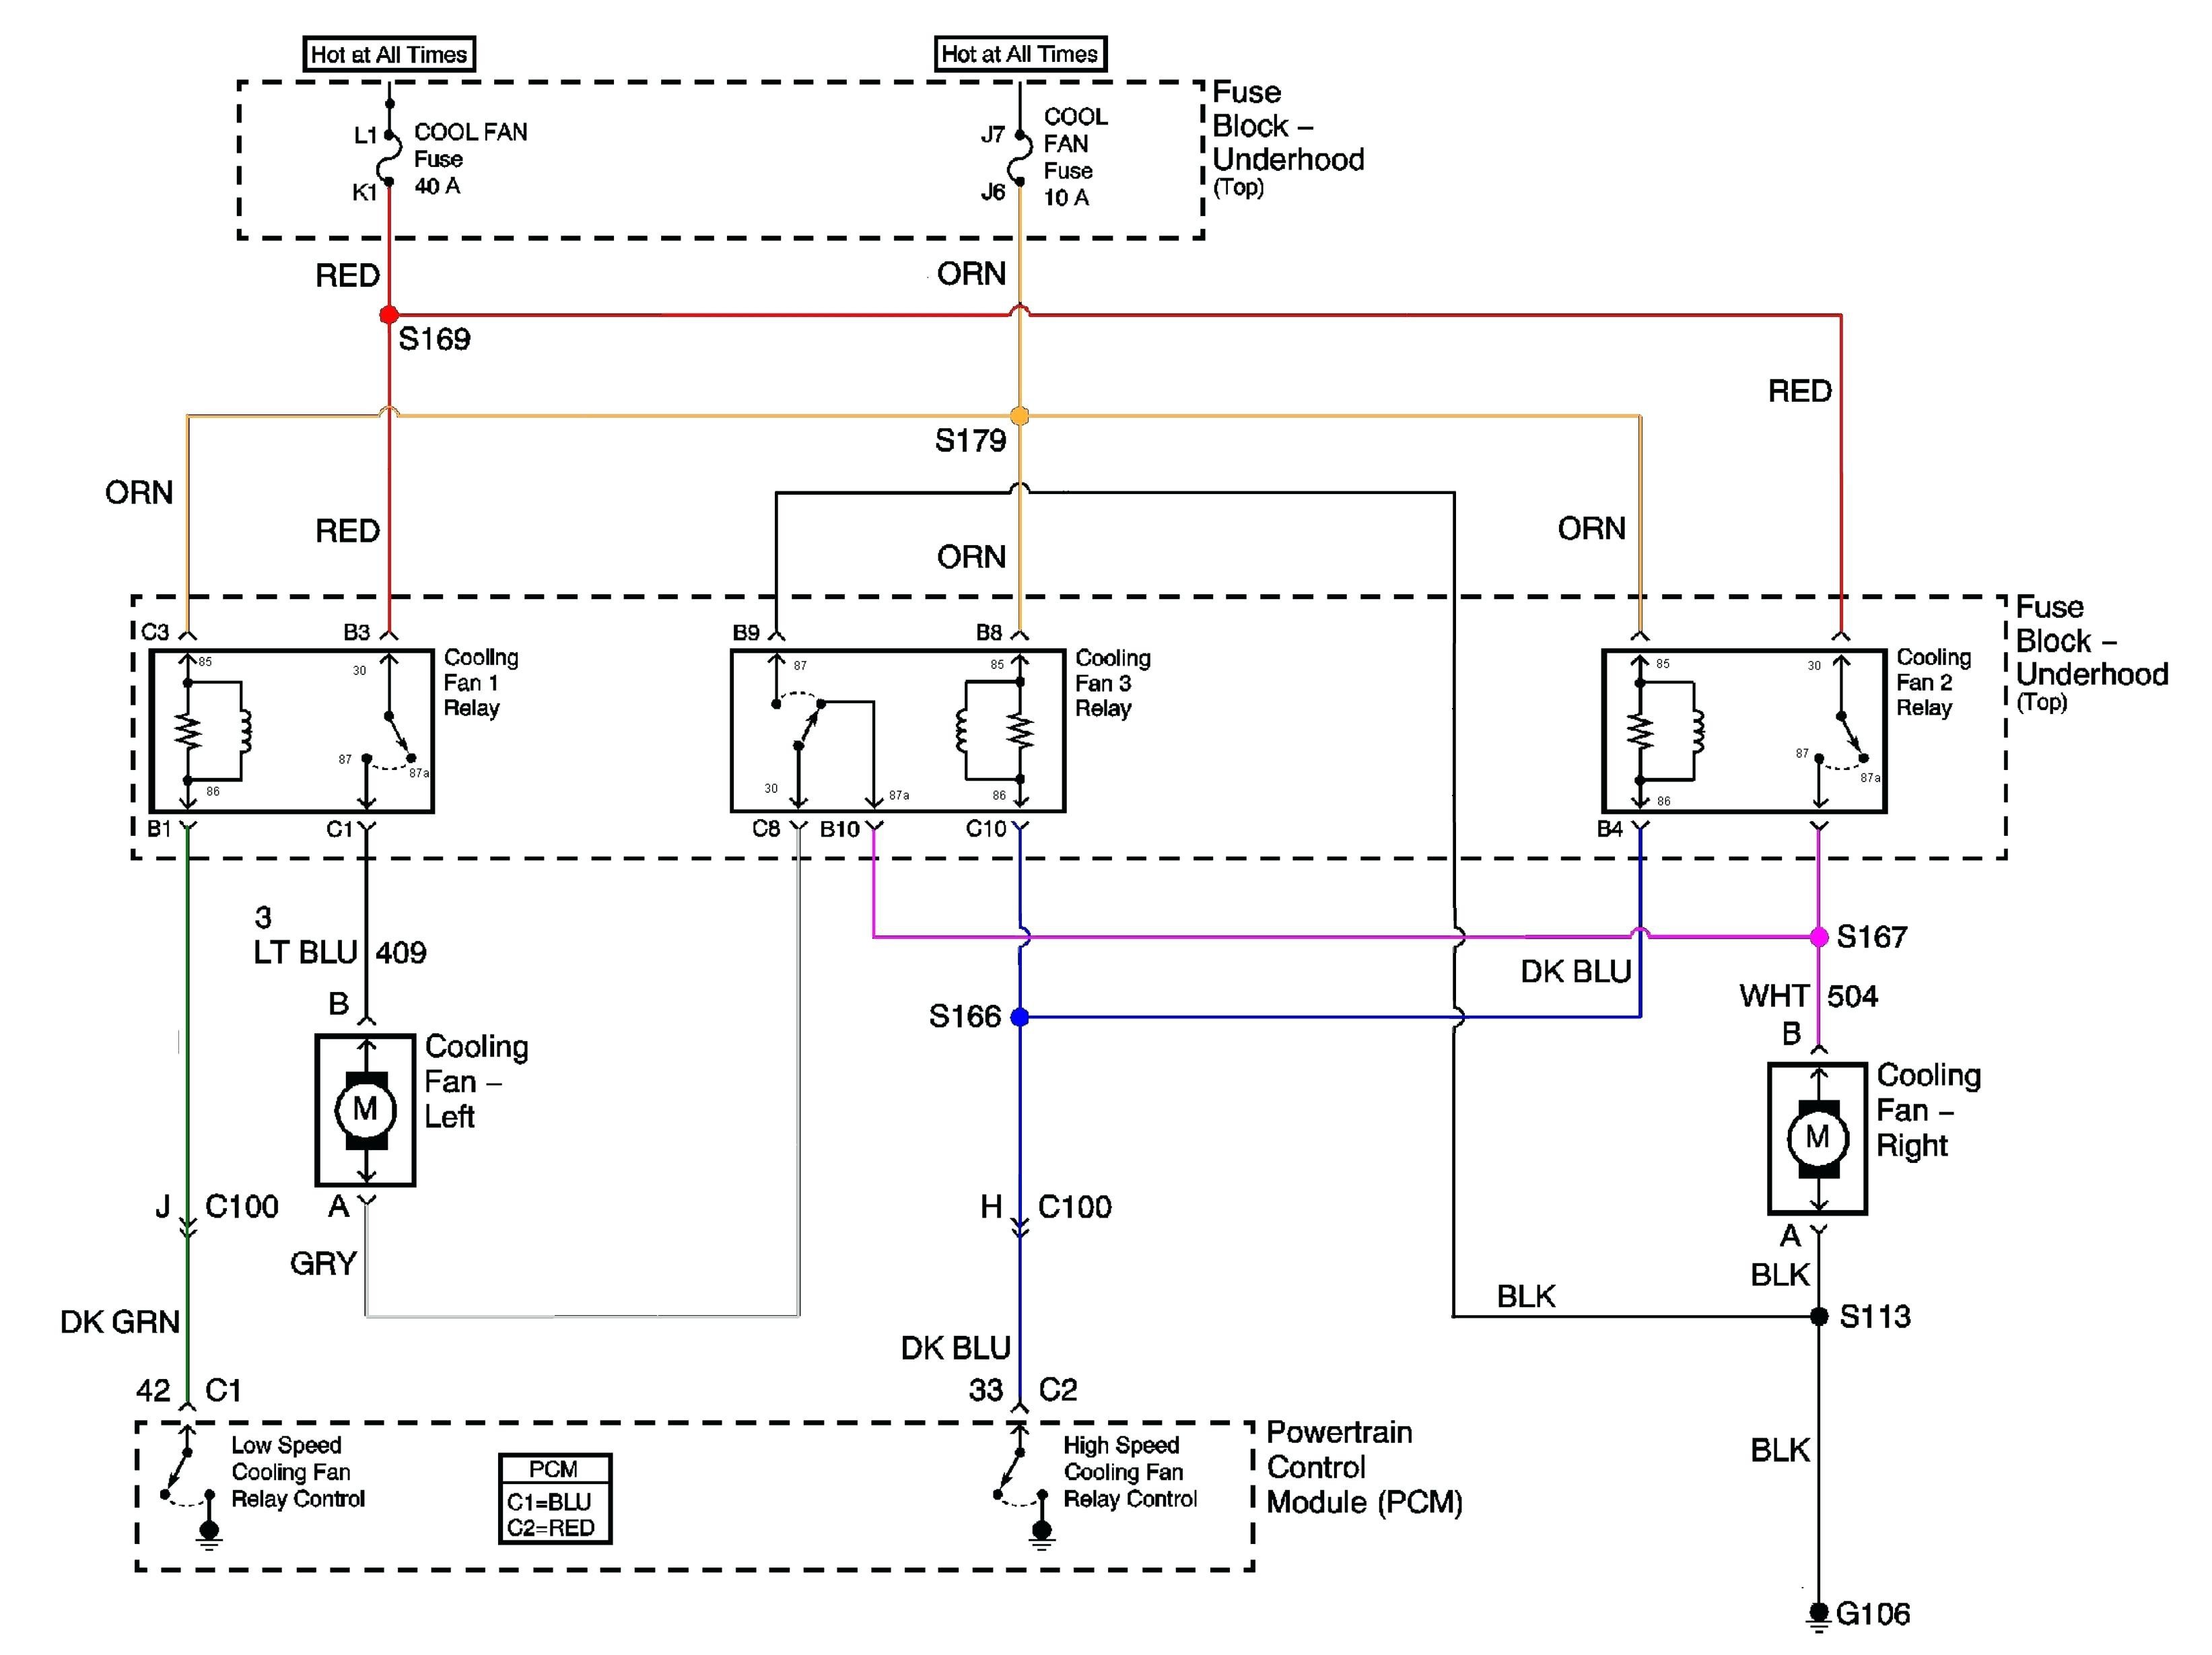 Cooling Fan Relay Wiring Diagram Beautiful Wiring Diagram Cooling Fan Relay Electrical Switch Lighting for